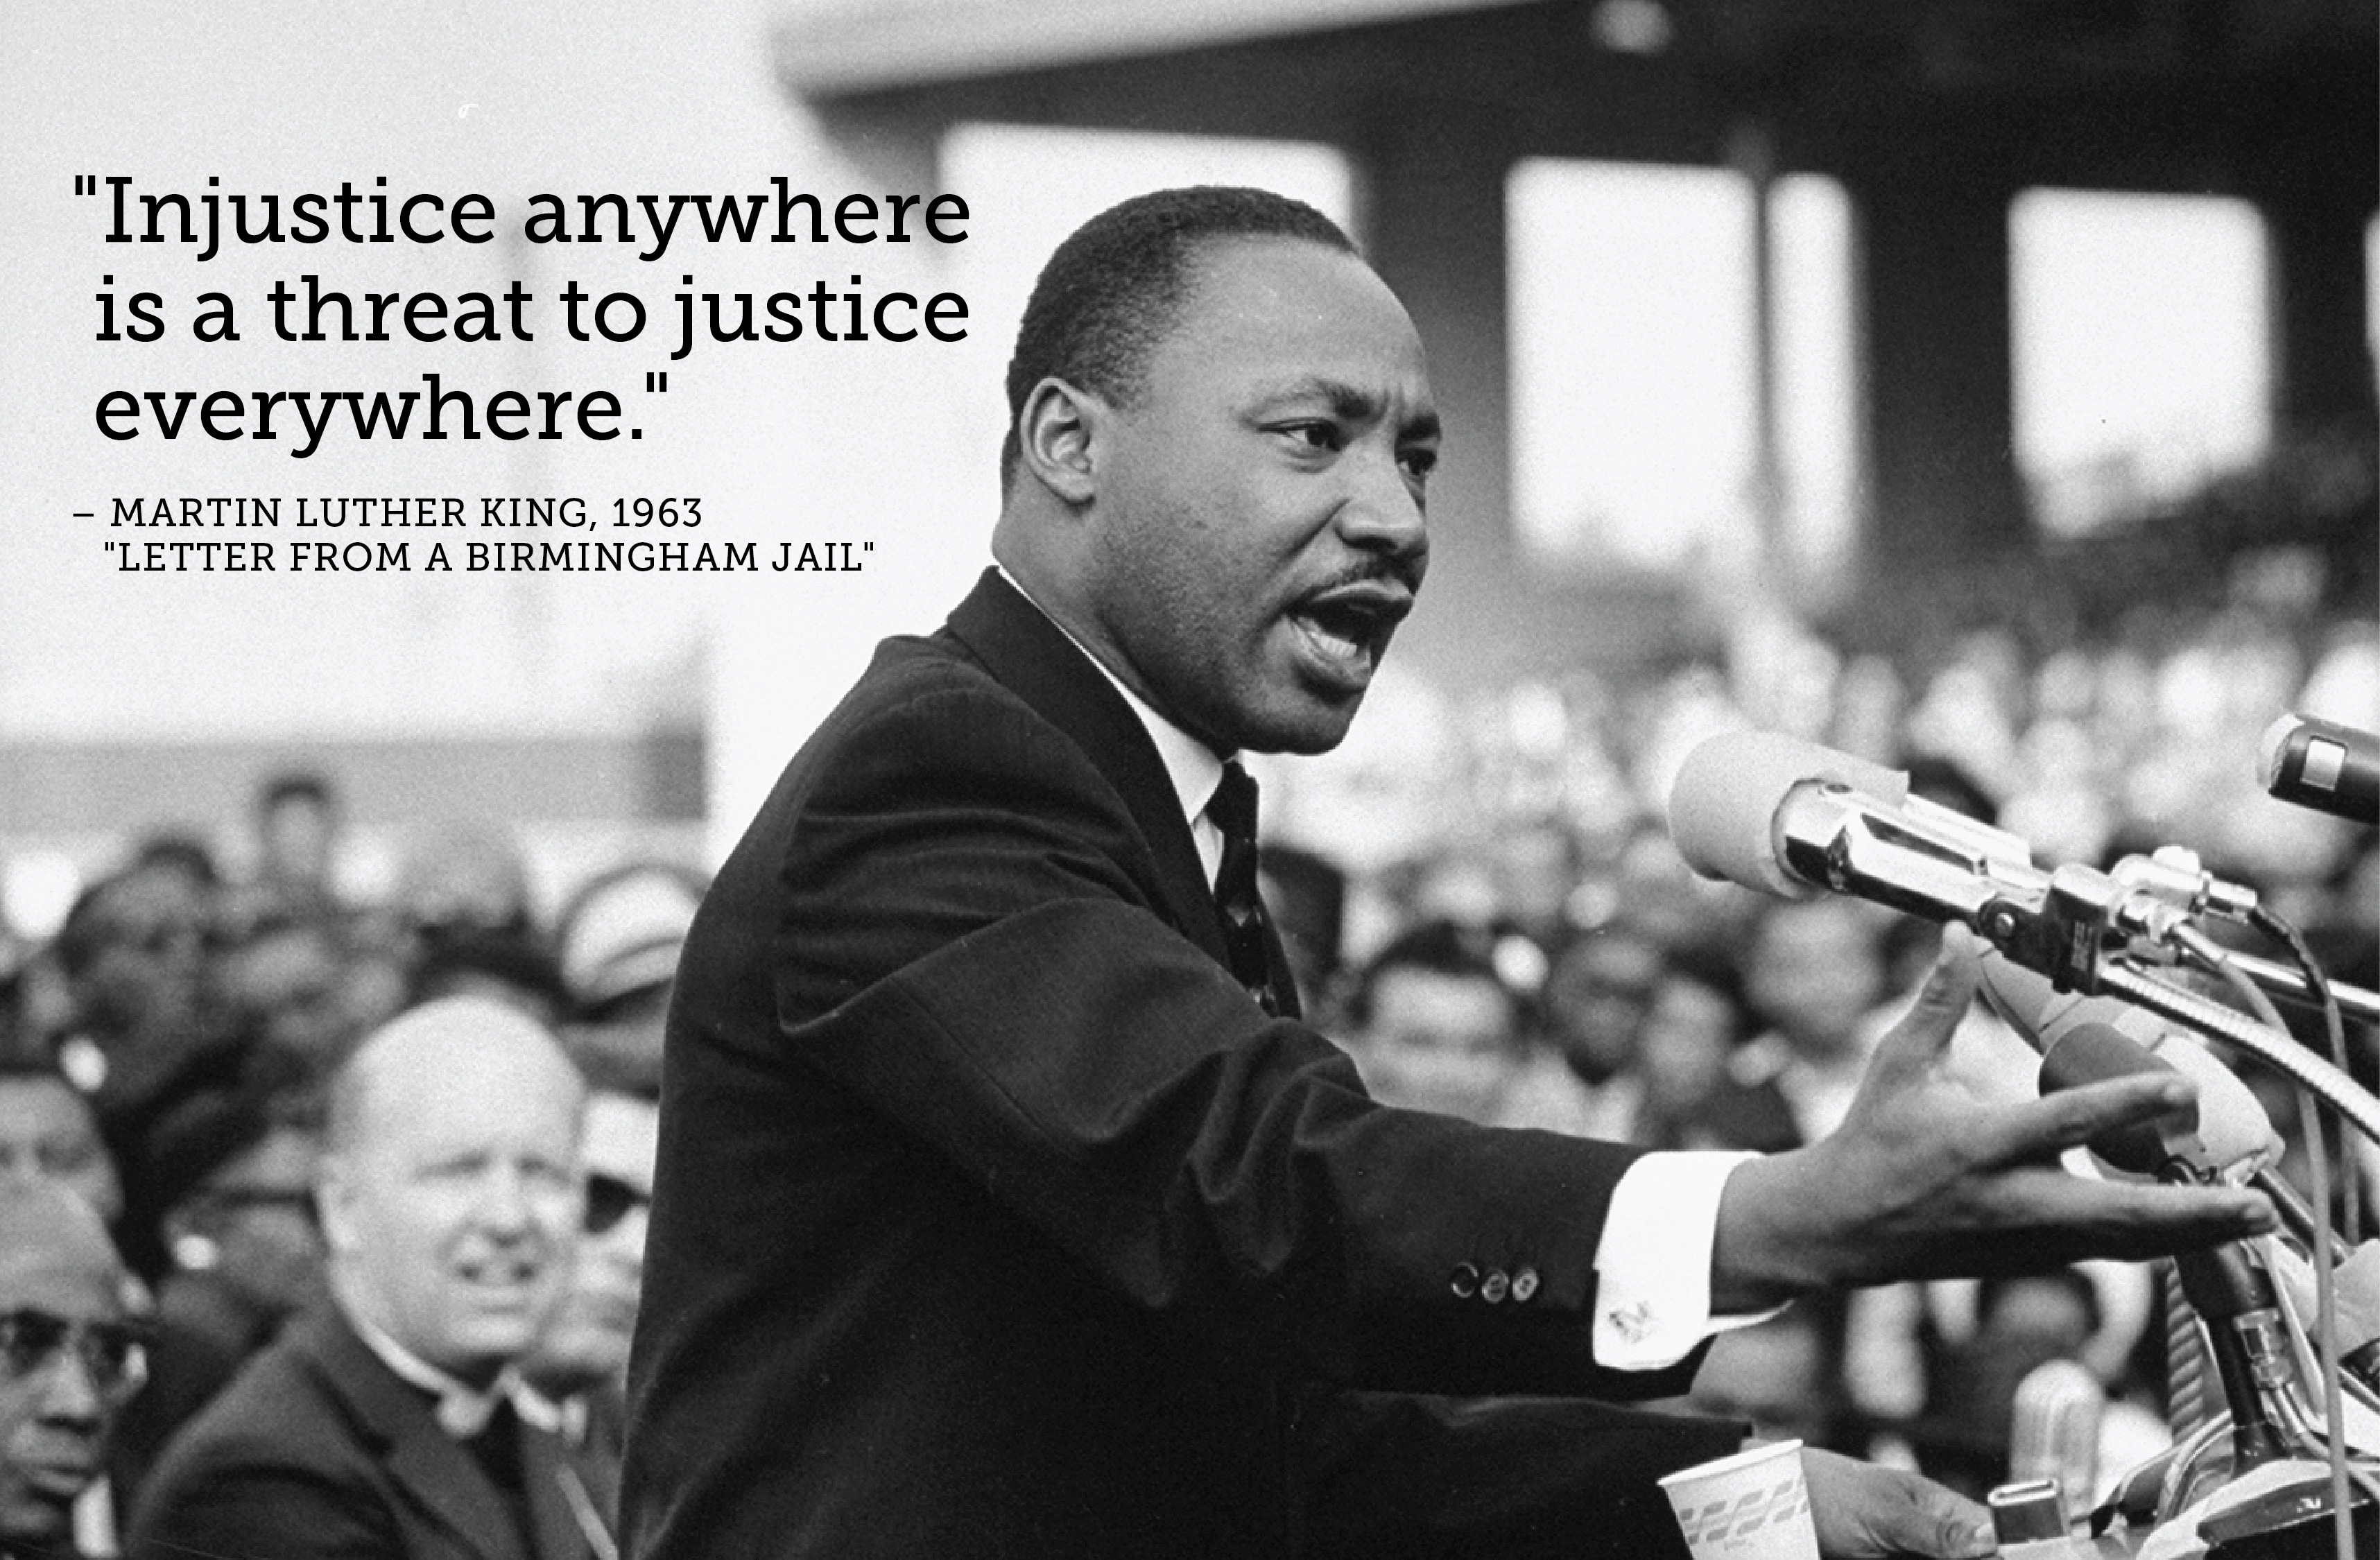 "Injustice anywhere is a threat to justice everywhere."